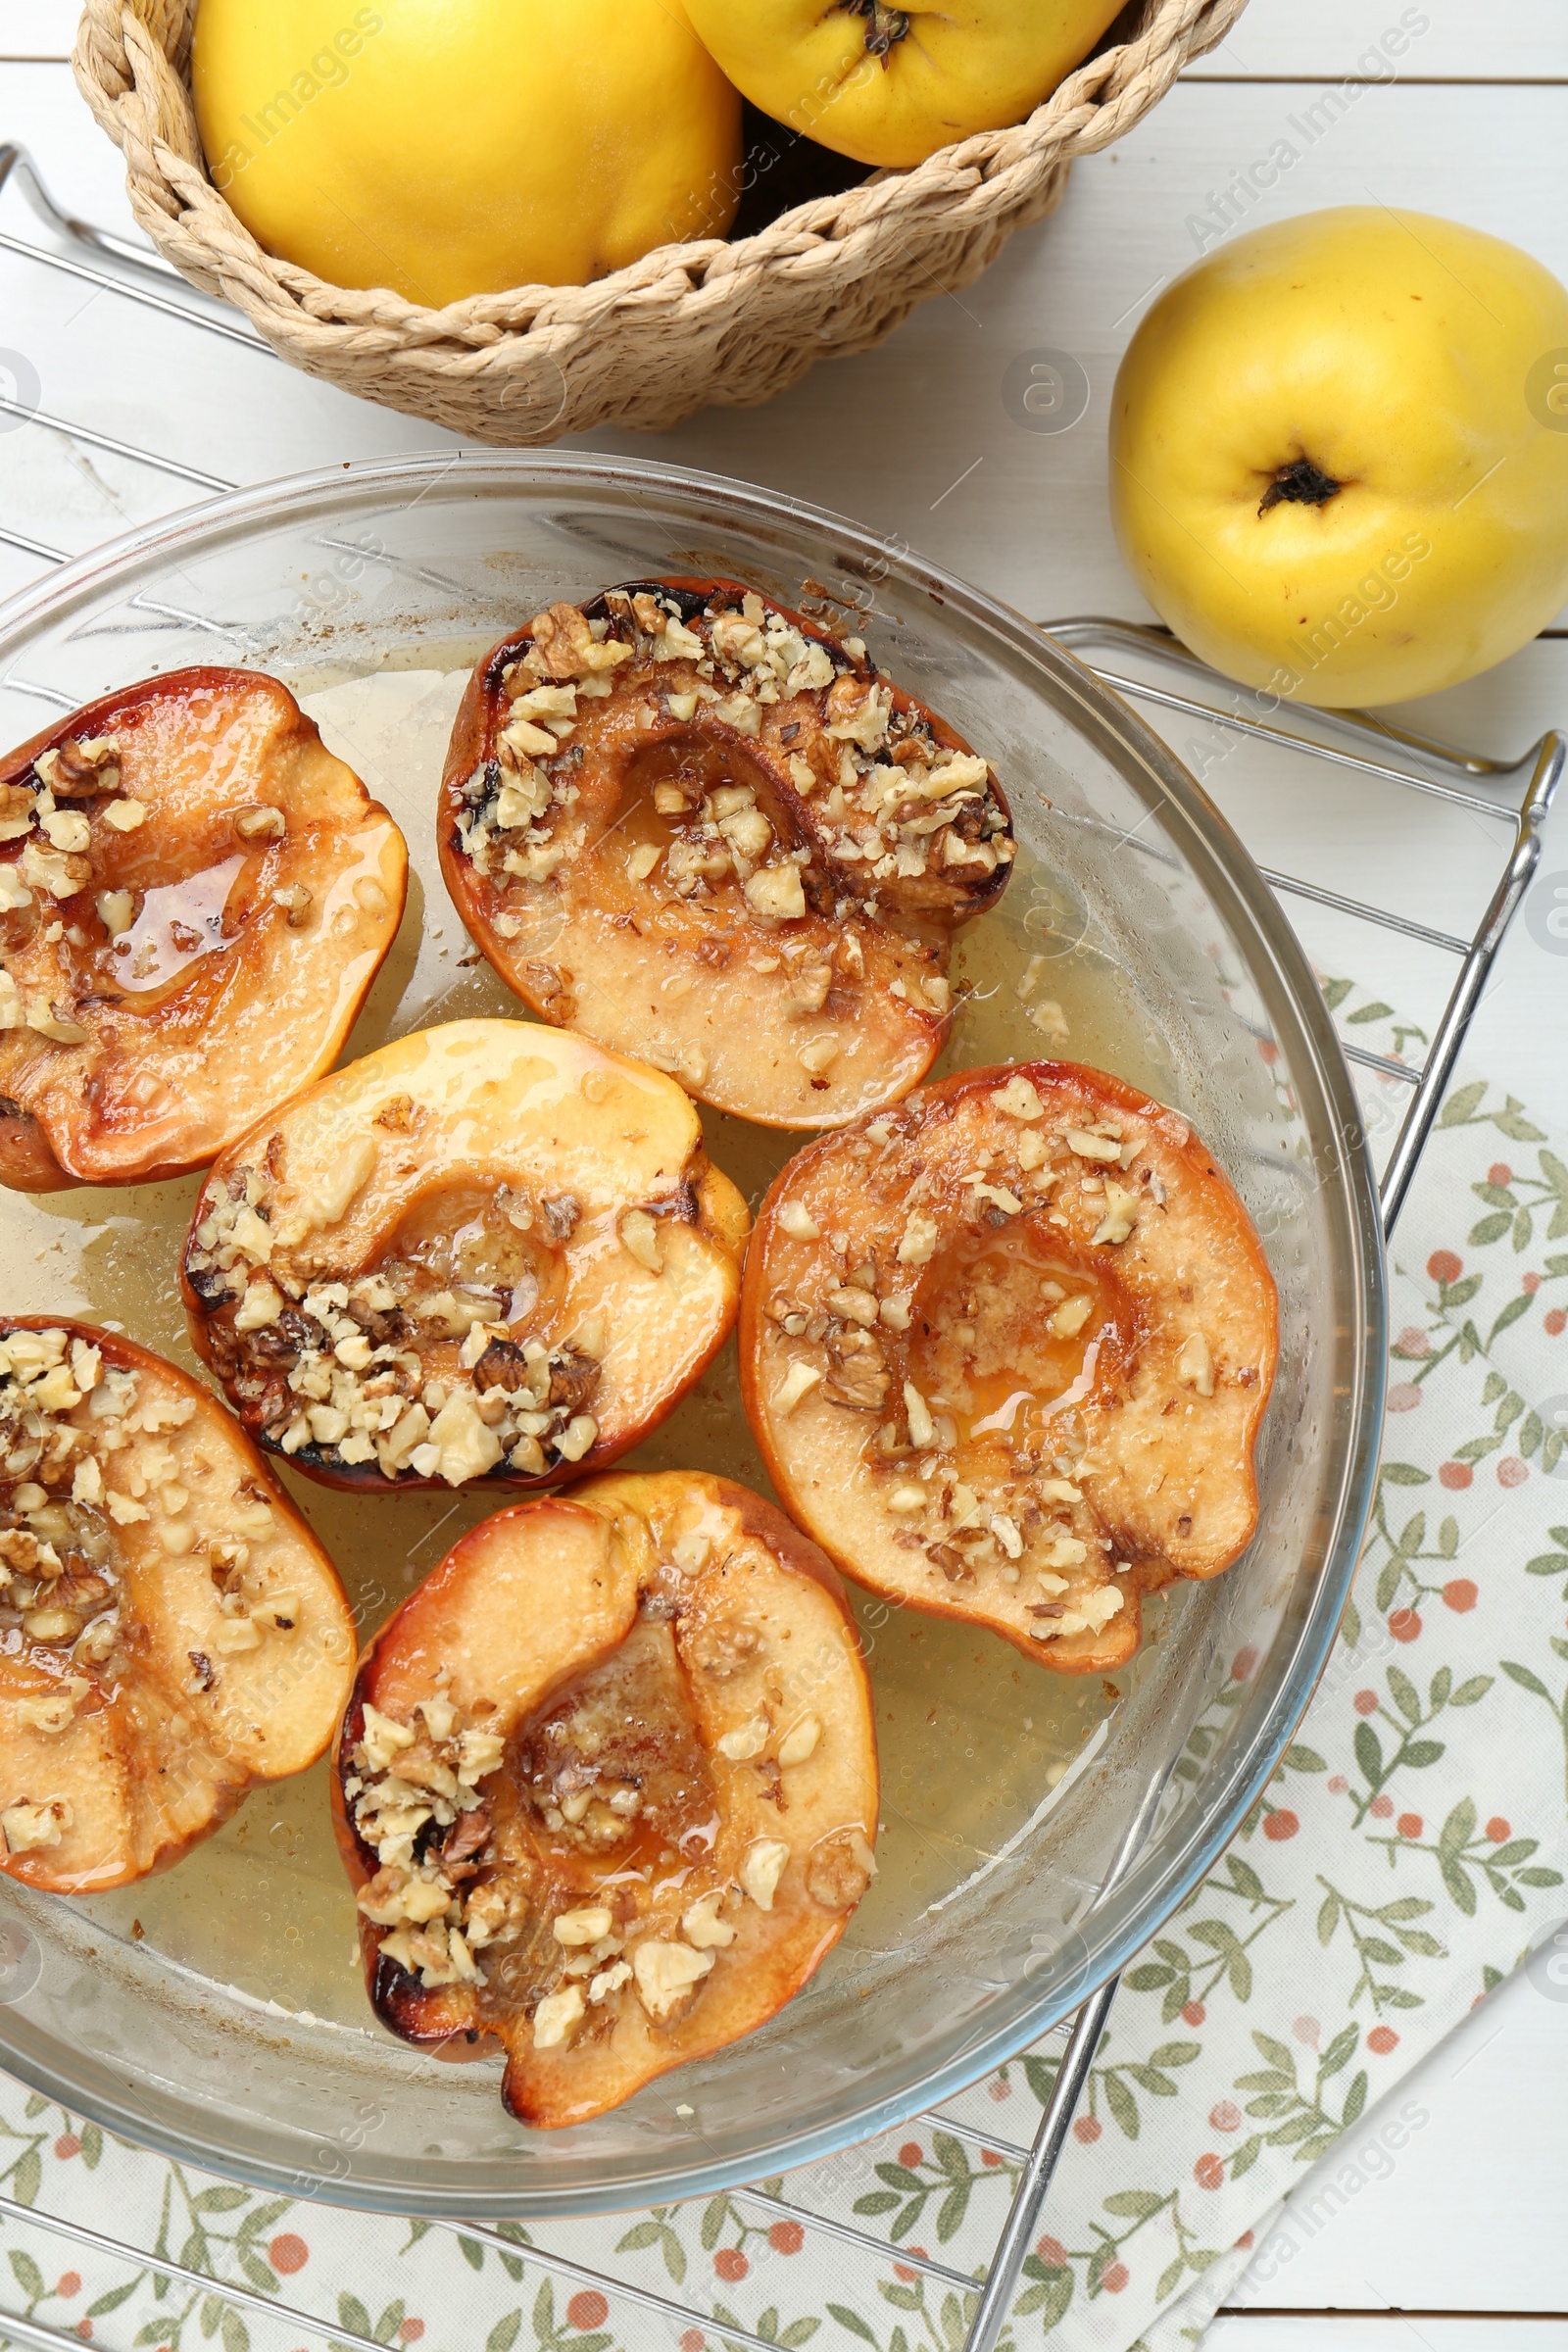 Photo of Delicious baked quinces with nuts in bowl and fresh fruits on table, flat lay